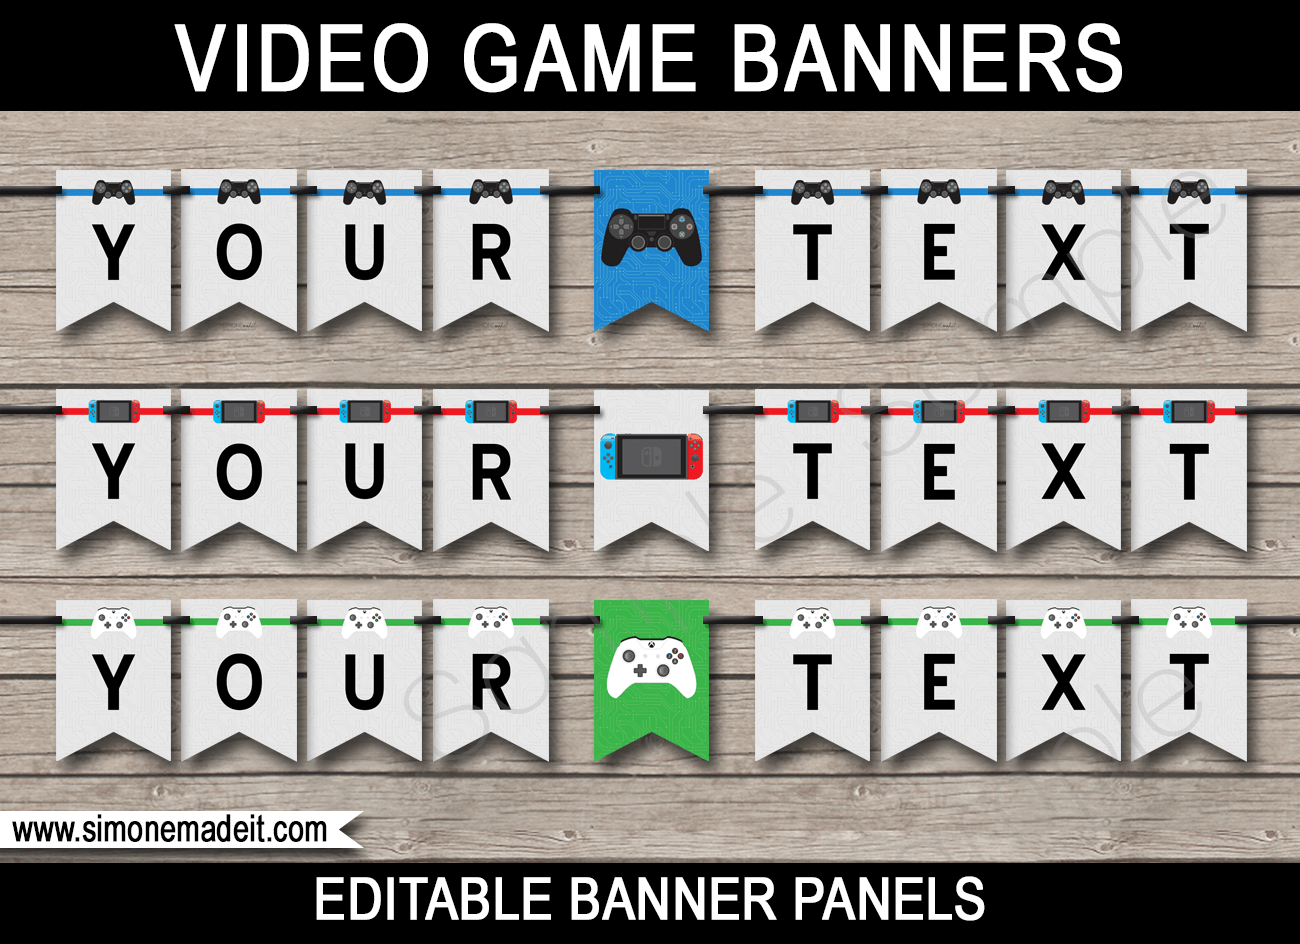 Video Game Theme Birthday Party Pennant Banners - Playstation Party Banner, Nintendo Switch Party Banner, Xbox Party Banner - editable template - instant download via simonemadeit.com